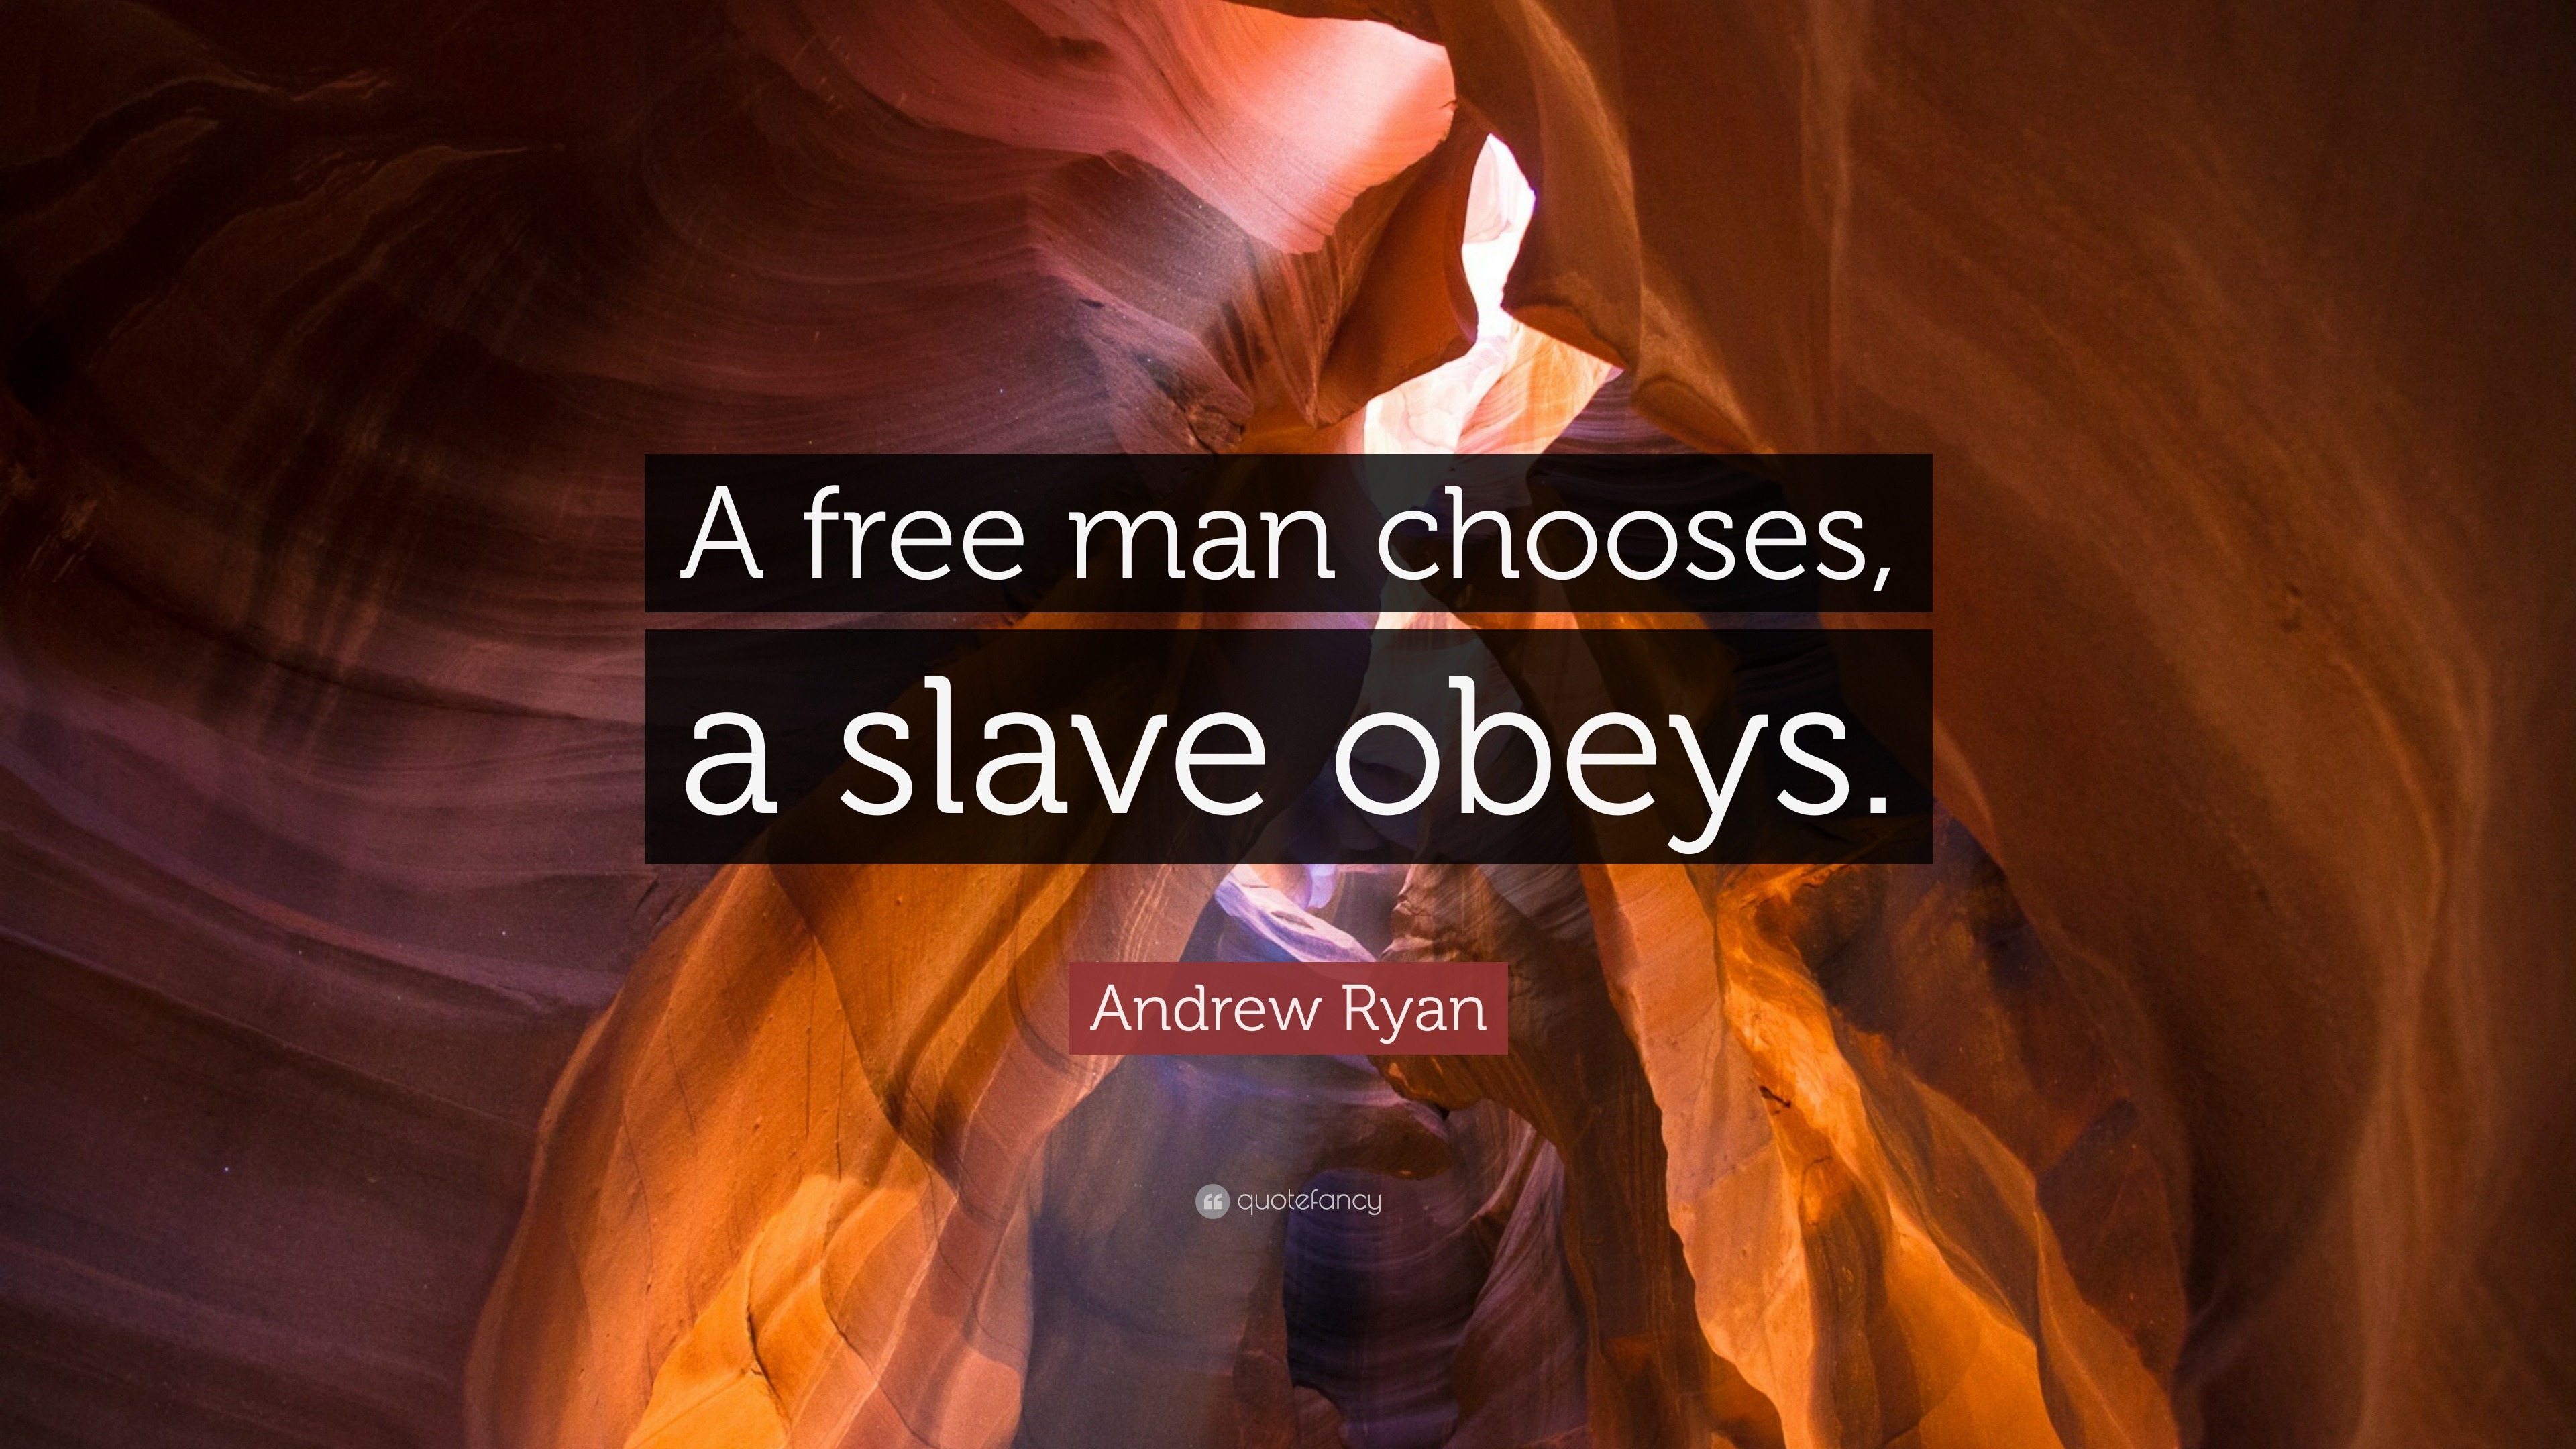 Andrew Ryan Quote: "A free man chooses, a slave obeys."